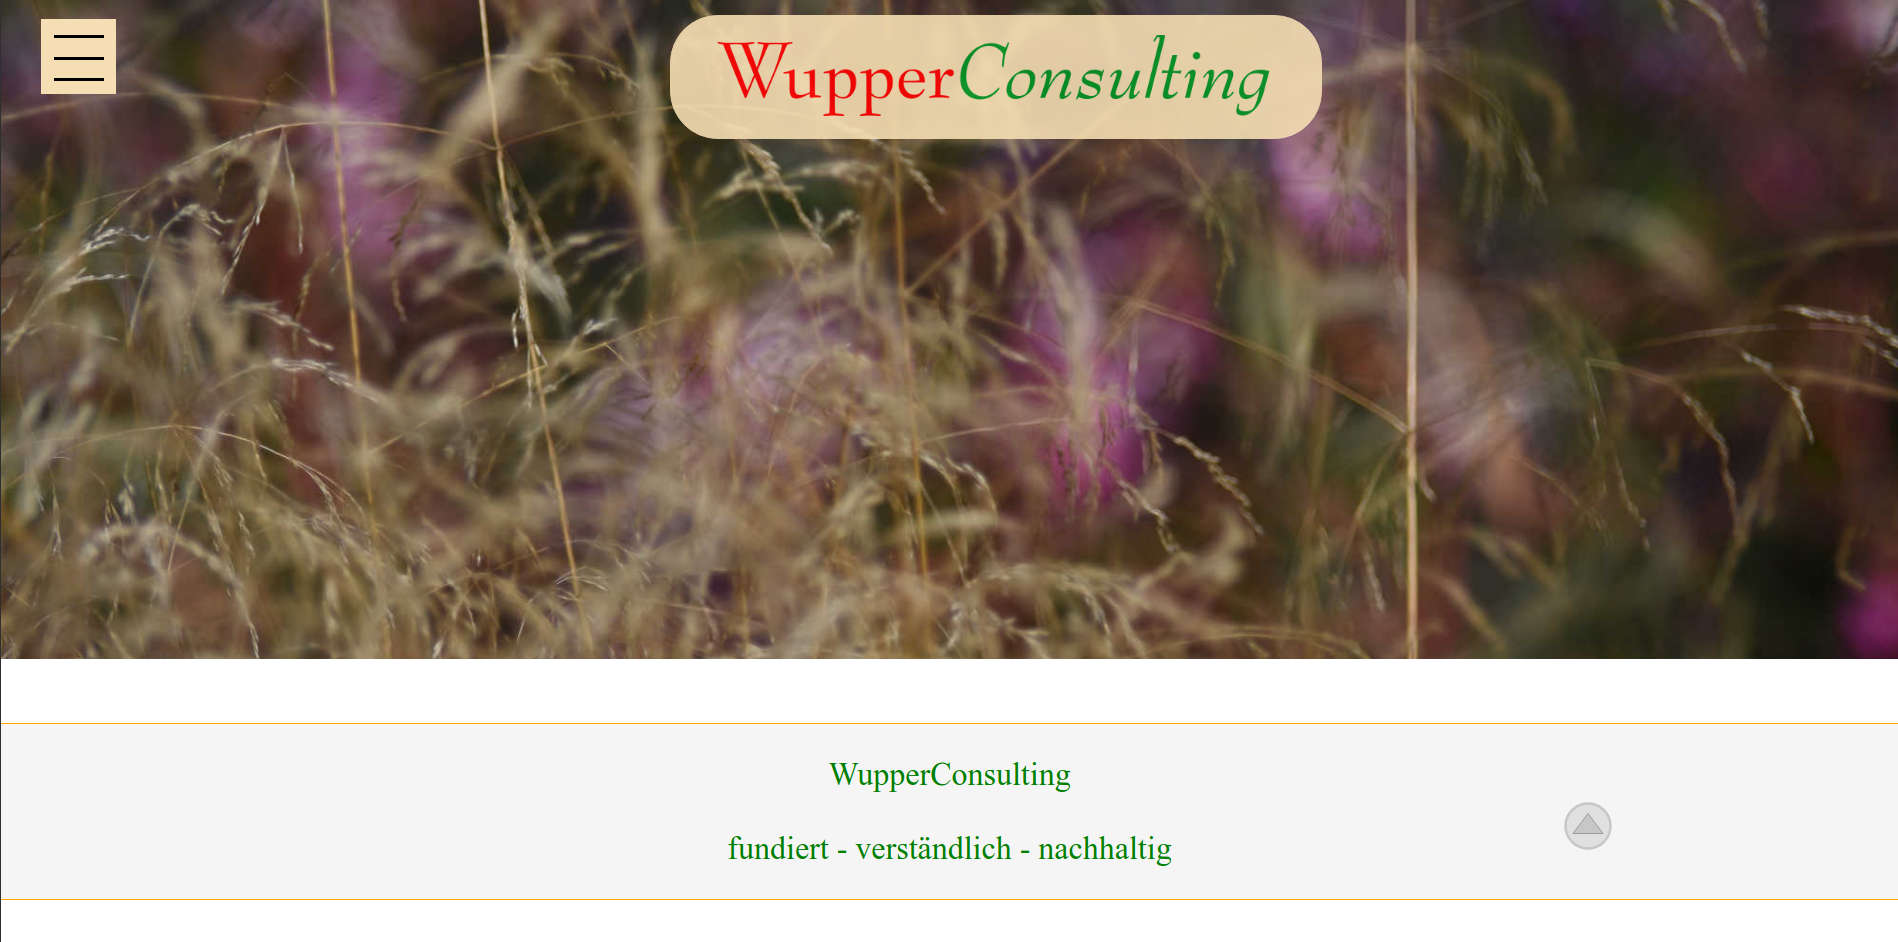 WupperConsulting 2020